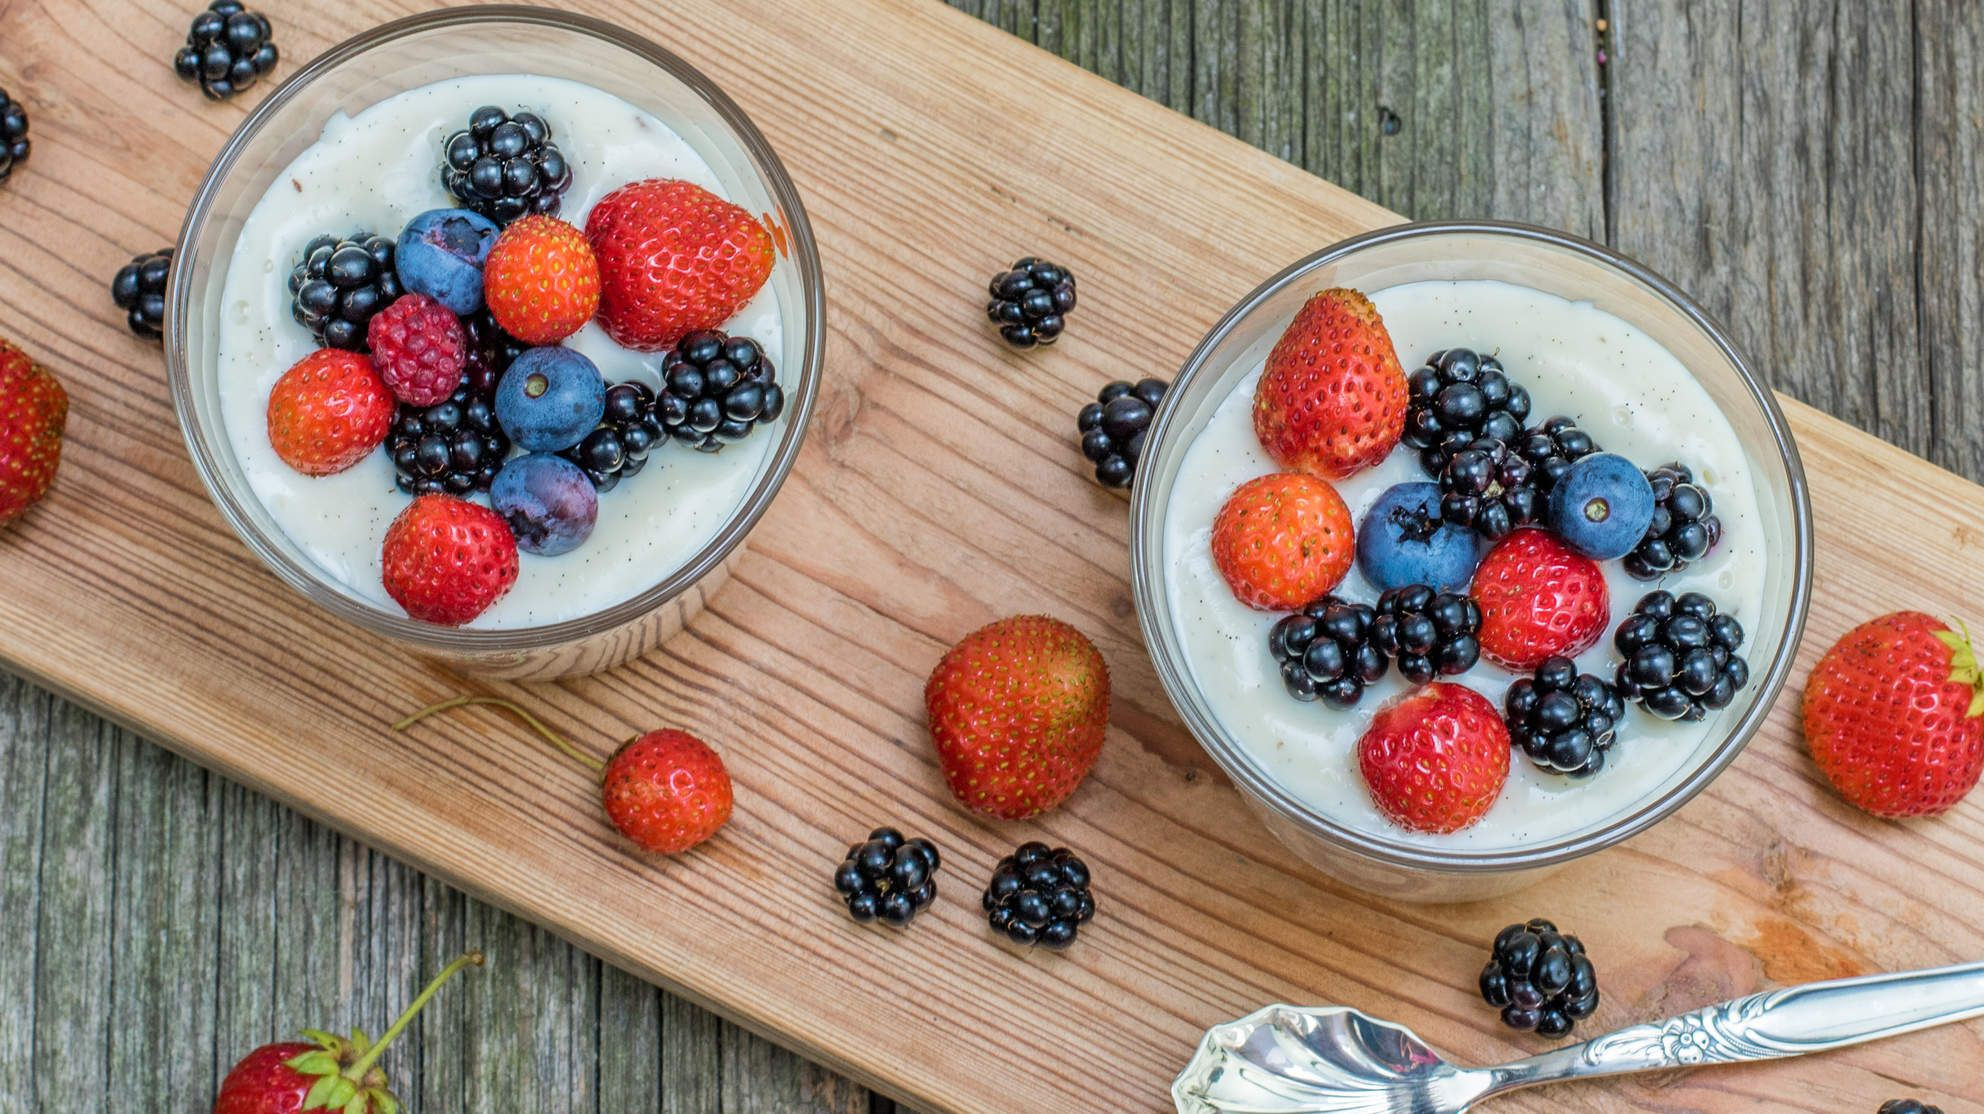 Make Ahead Summer Desserts
 The Best No Cook Make Ahead Dessert for the 4th of July